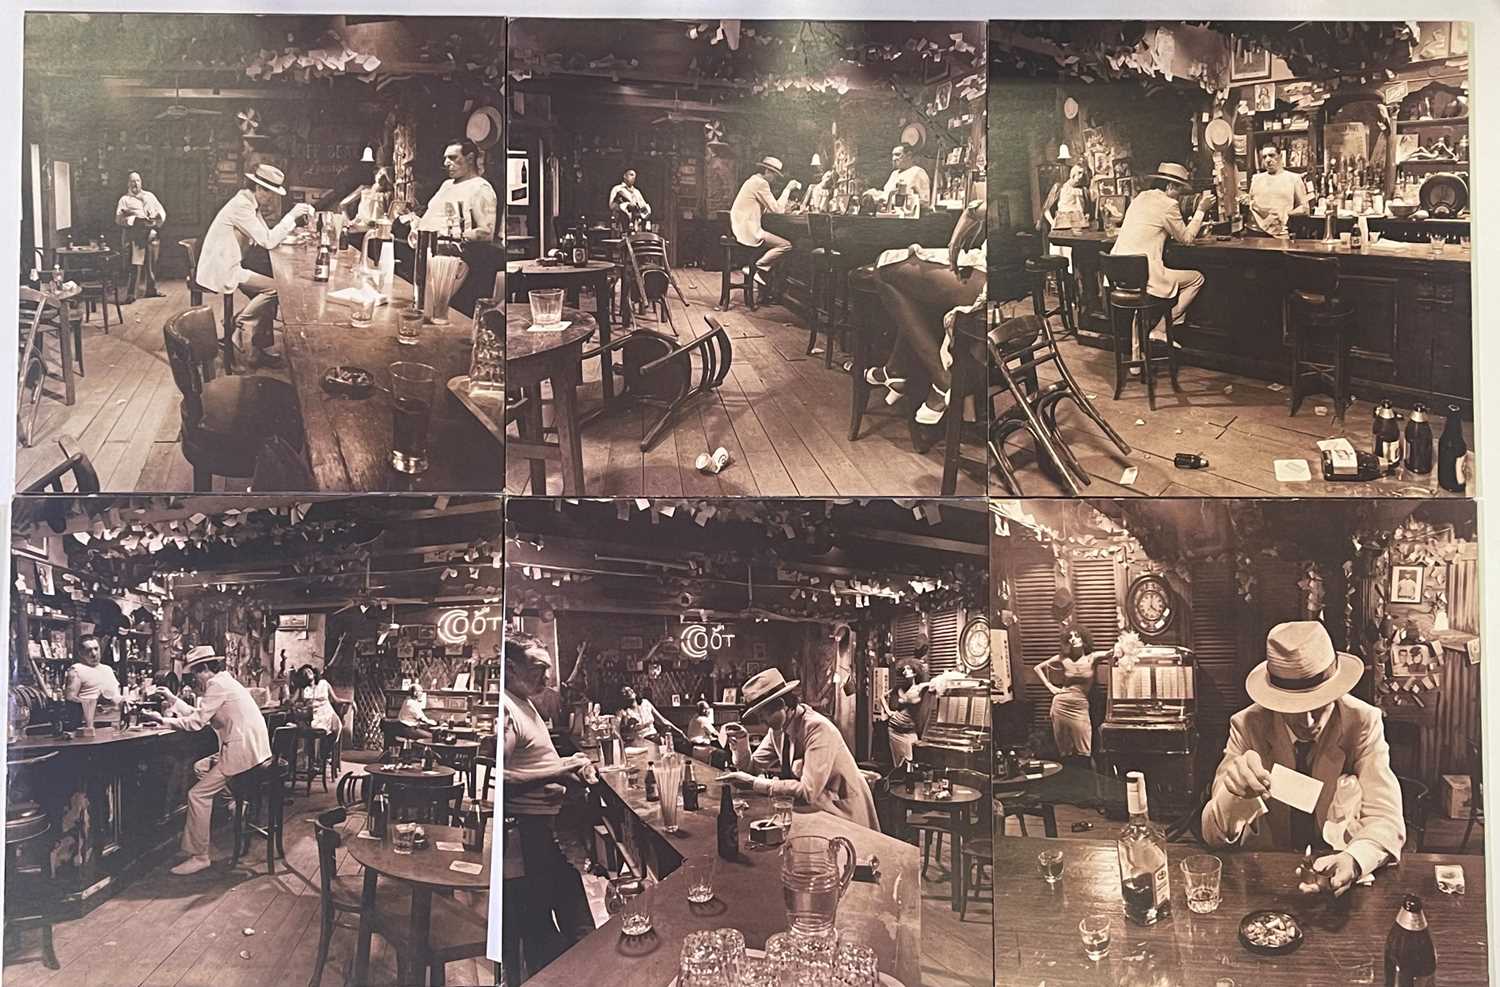 Lot 13 - LED ZEPPELIN - IN THROUGH THE OUT DOOR LPs (ORIGINAL UK SLEEVE DESIGNS 'A' TO 'F')